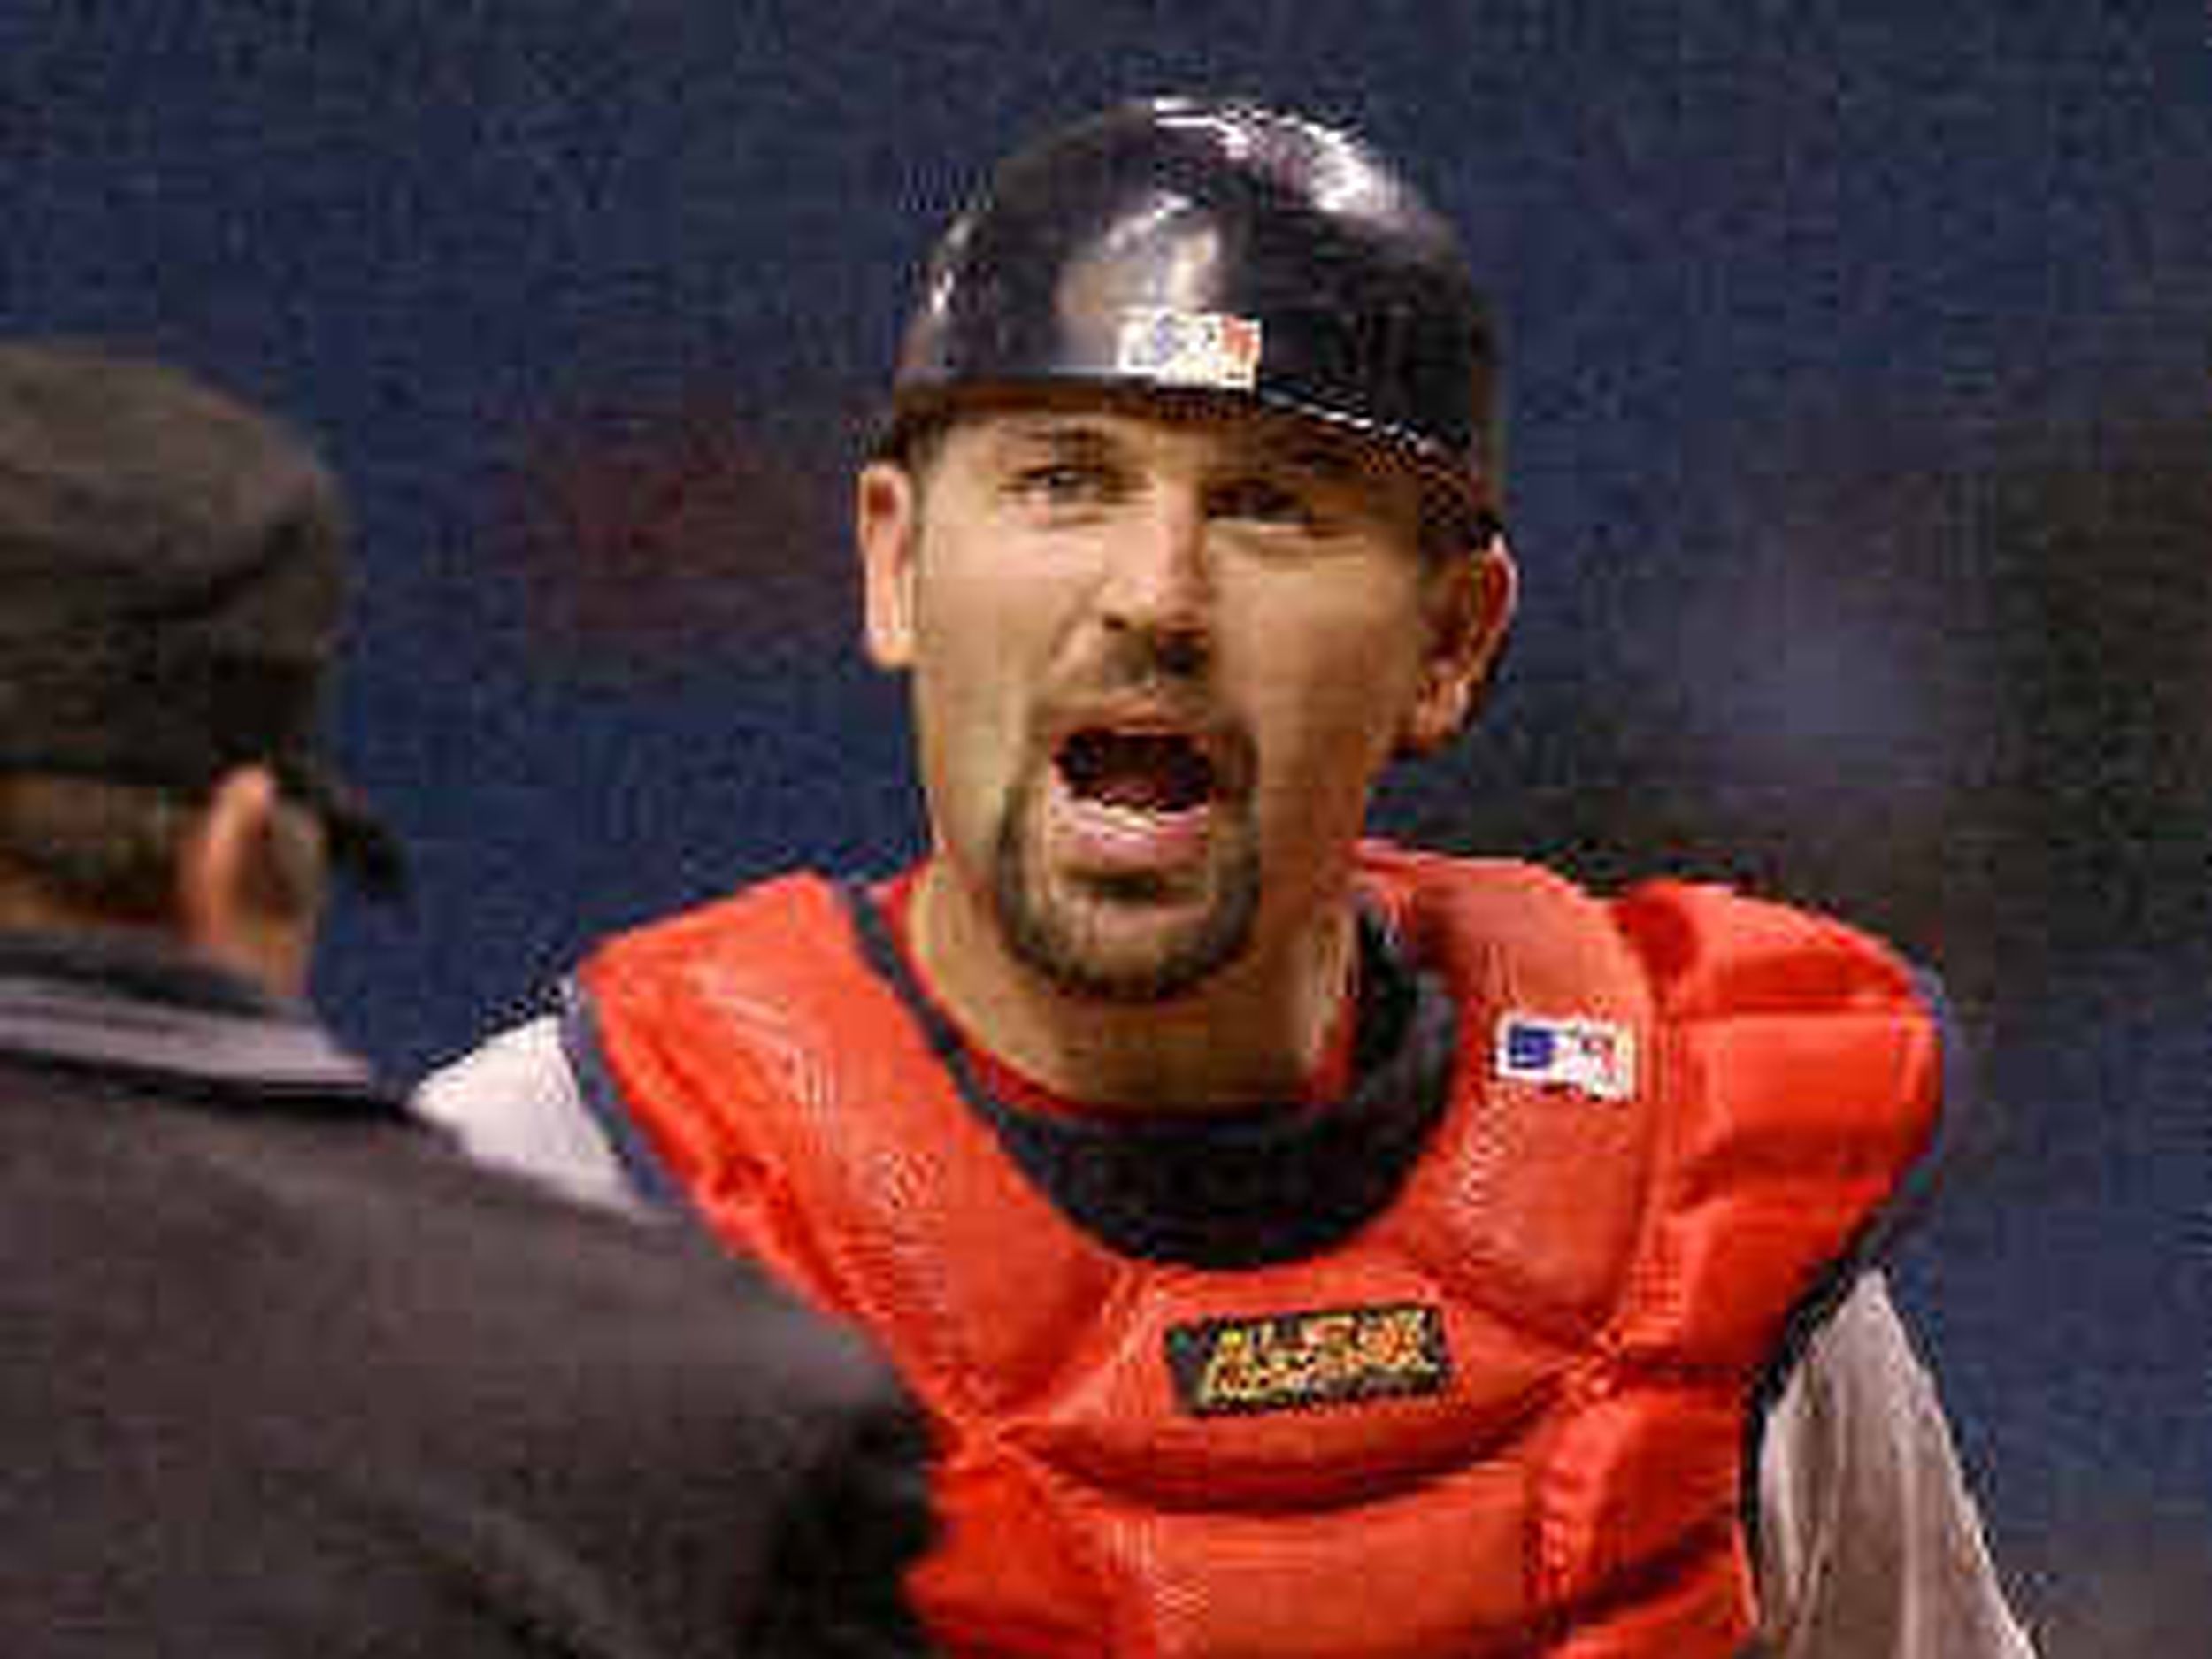 Jason Varitek is close to an agreement to work for the Red Sox - NBC Sports